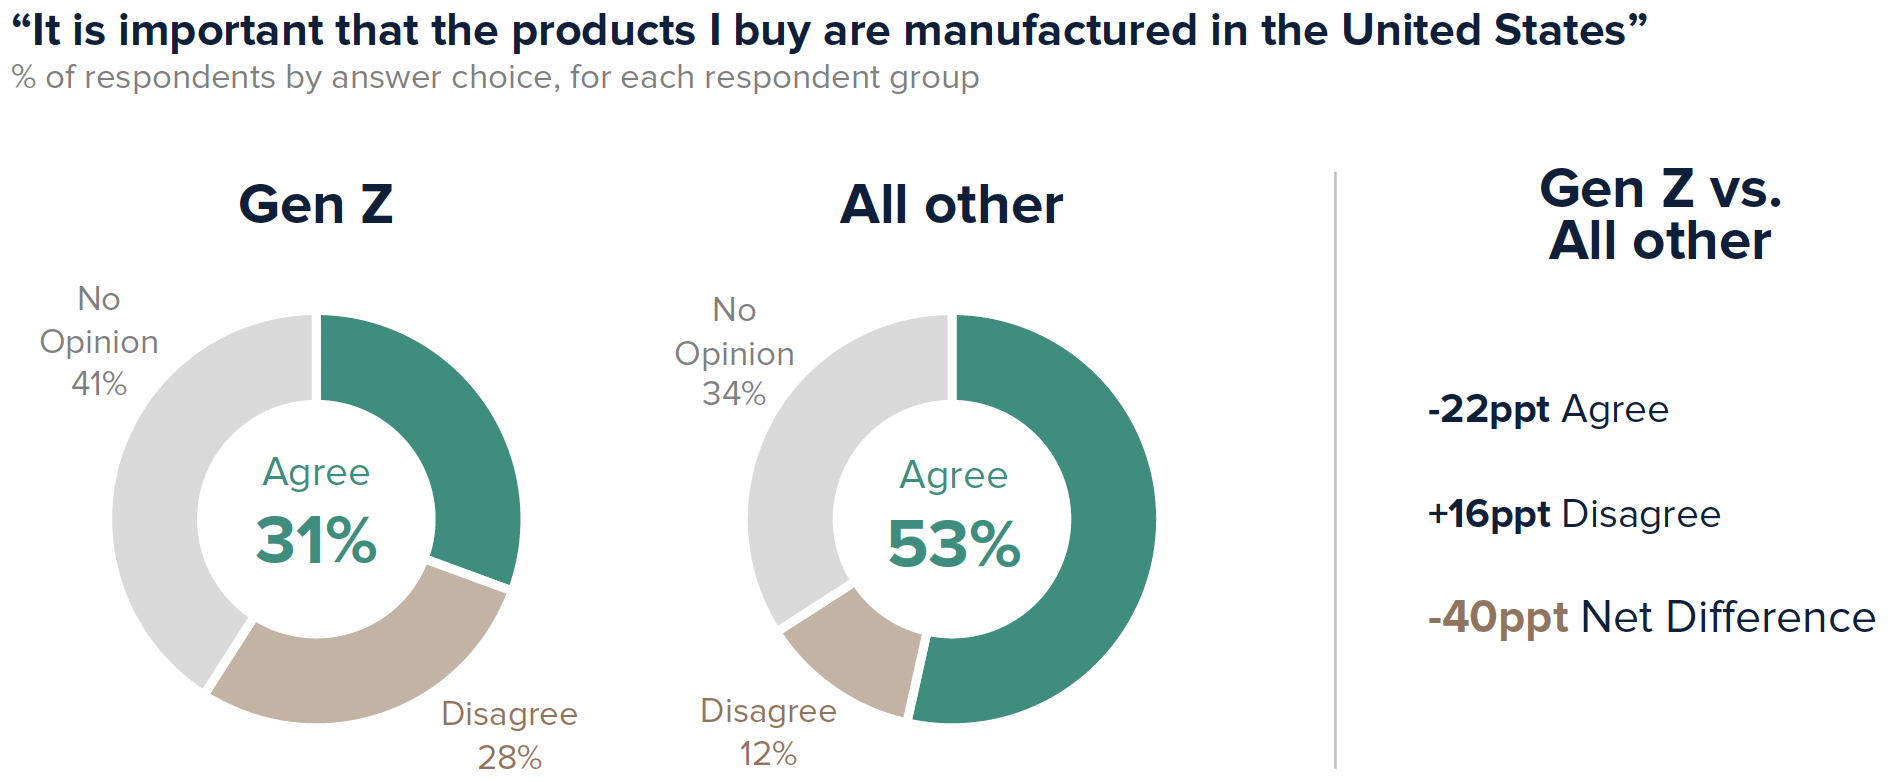 31% of Gen Z agrees “It is important that the products I buy are manufactured in the United States”